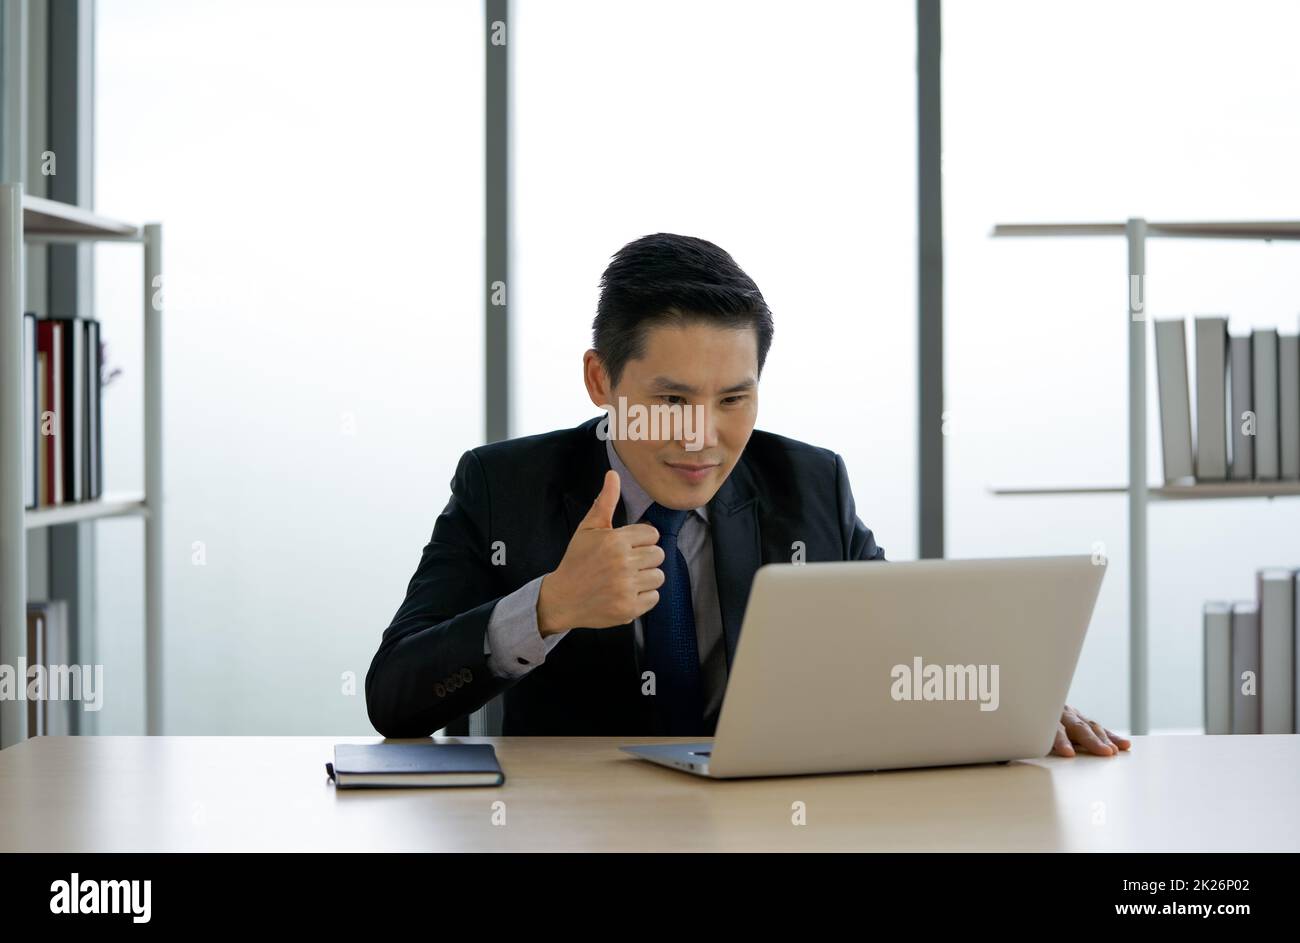 Asian businessman in black suit raise finger thumb up via video conference on computer monitor. Concept of teleconferencing through wireless communication. Stock Photo